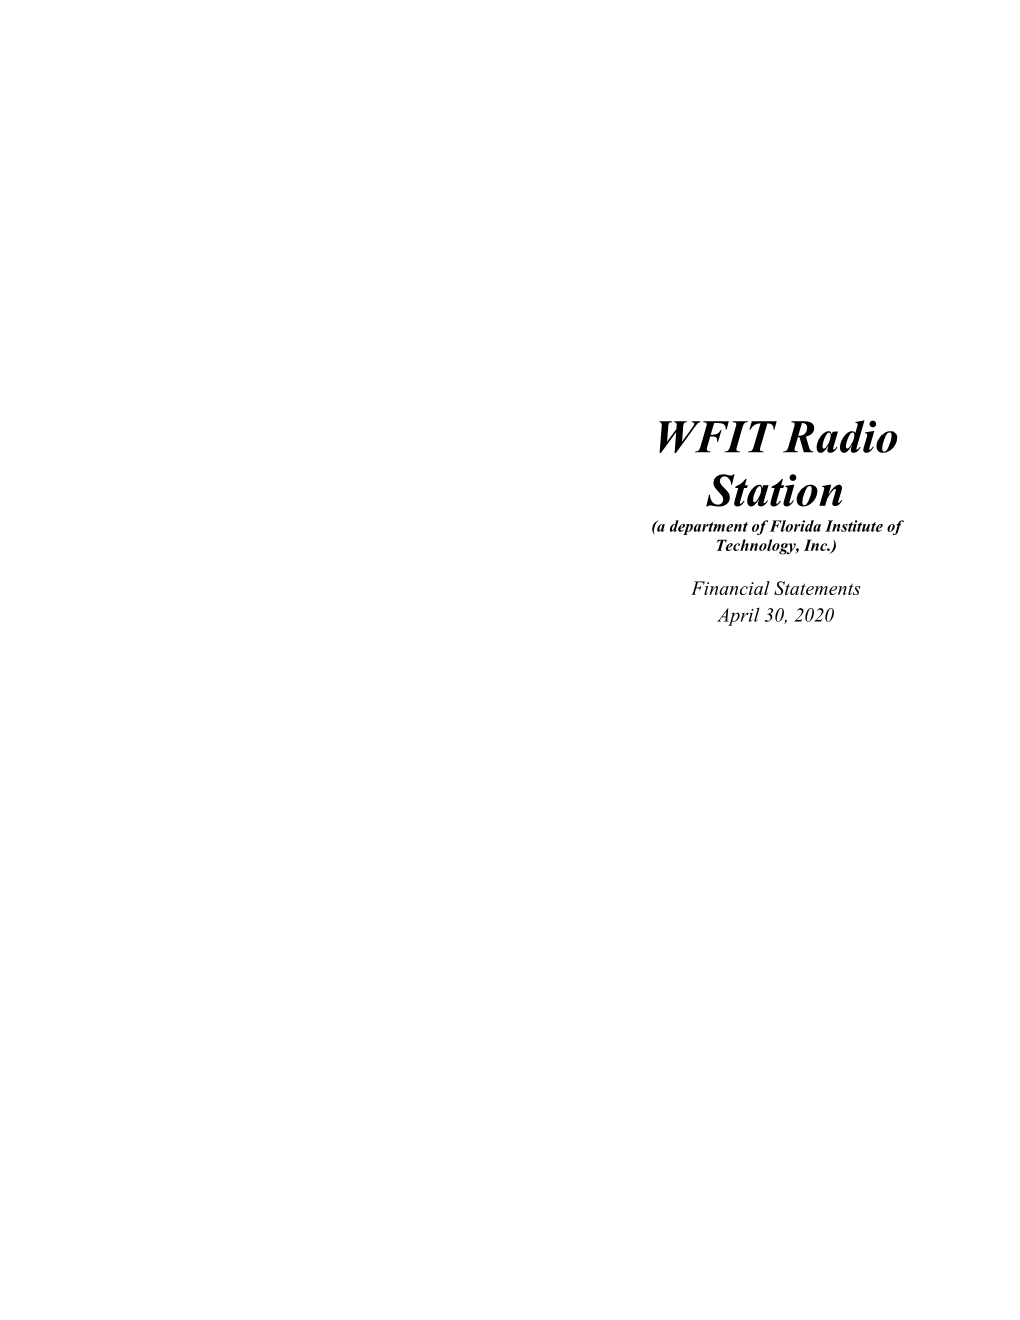 WFIT Radio Station (A Department of Florida Institute of Technology, Inc.)